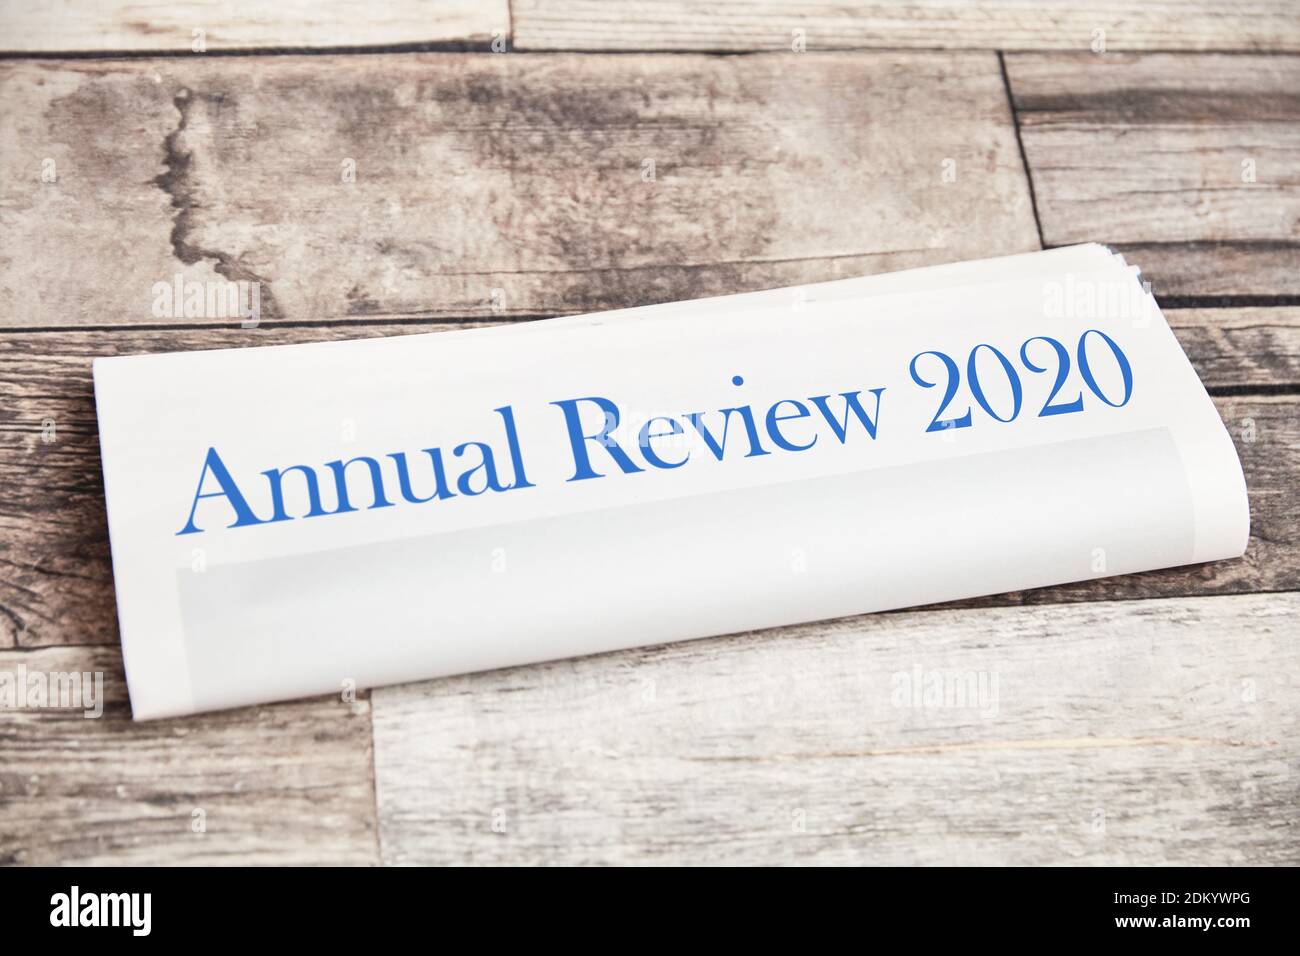 Annual Review 2020 on a folded newspaper as the front page Stock Photo